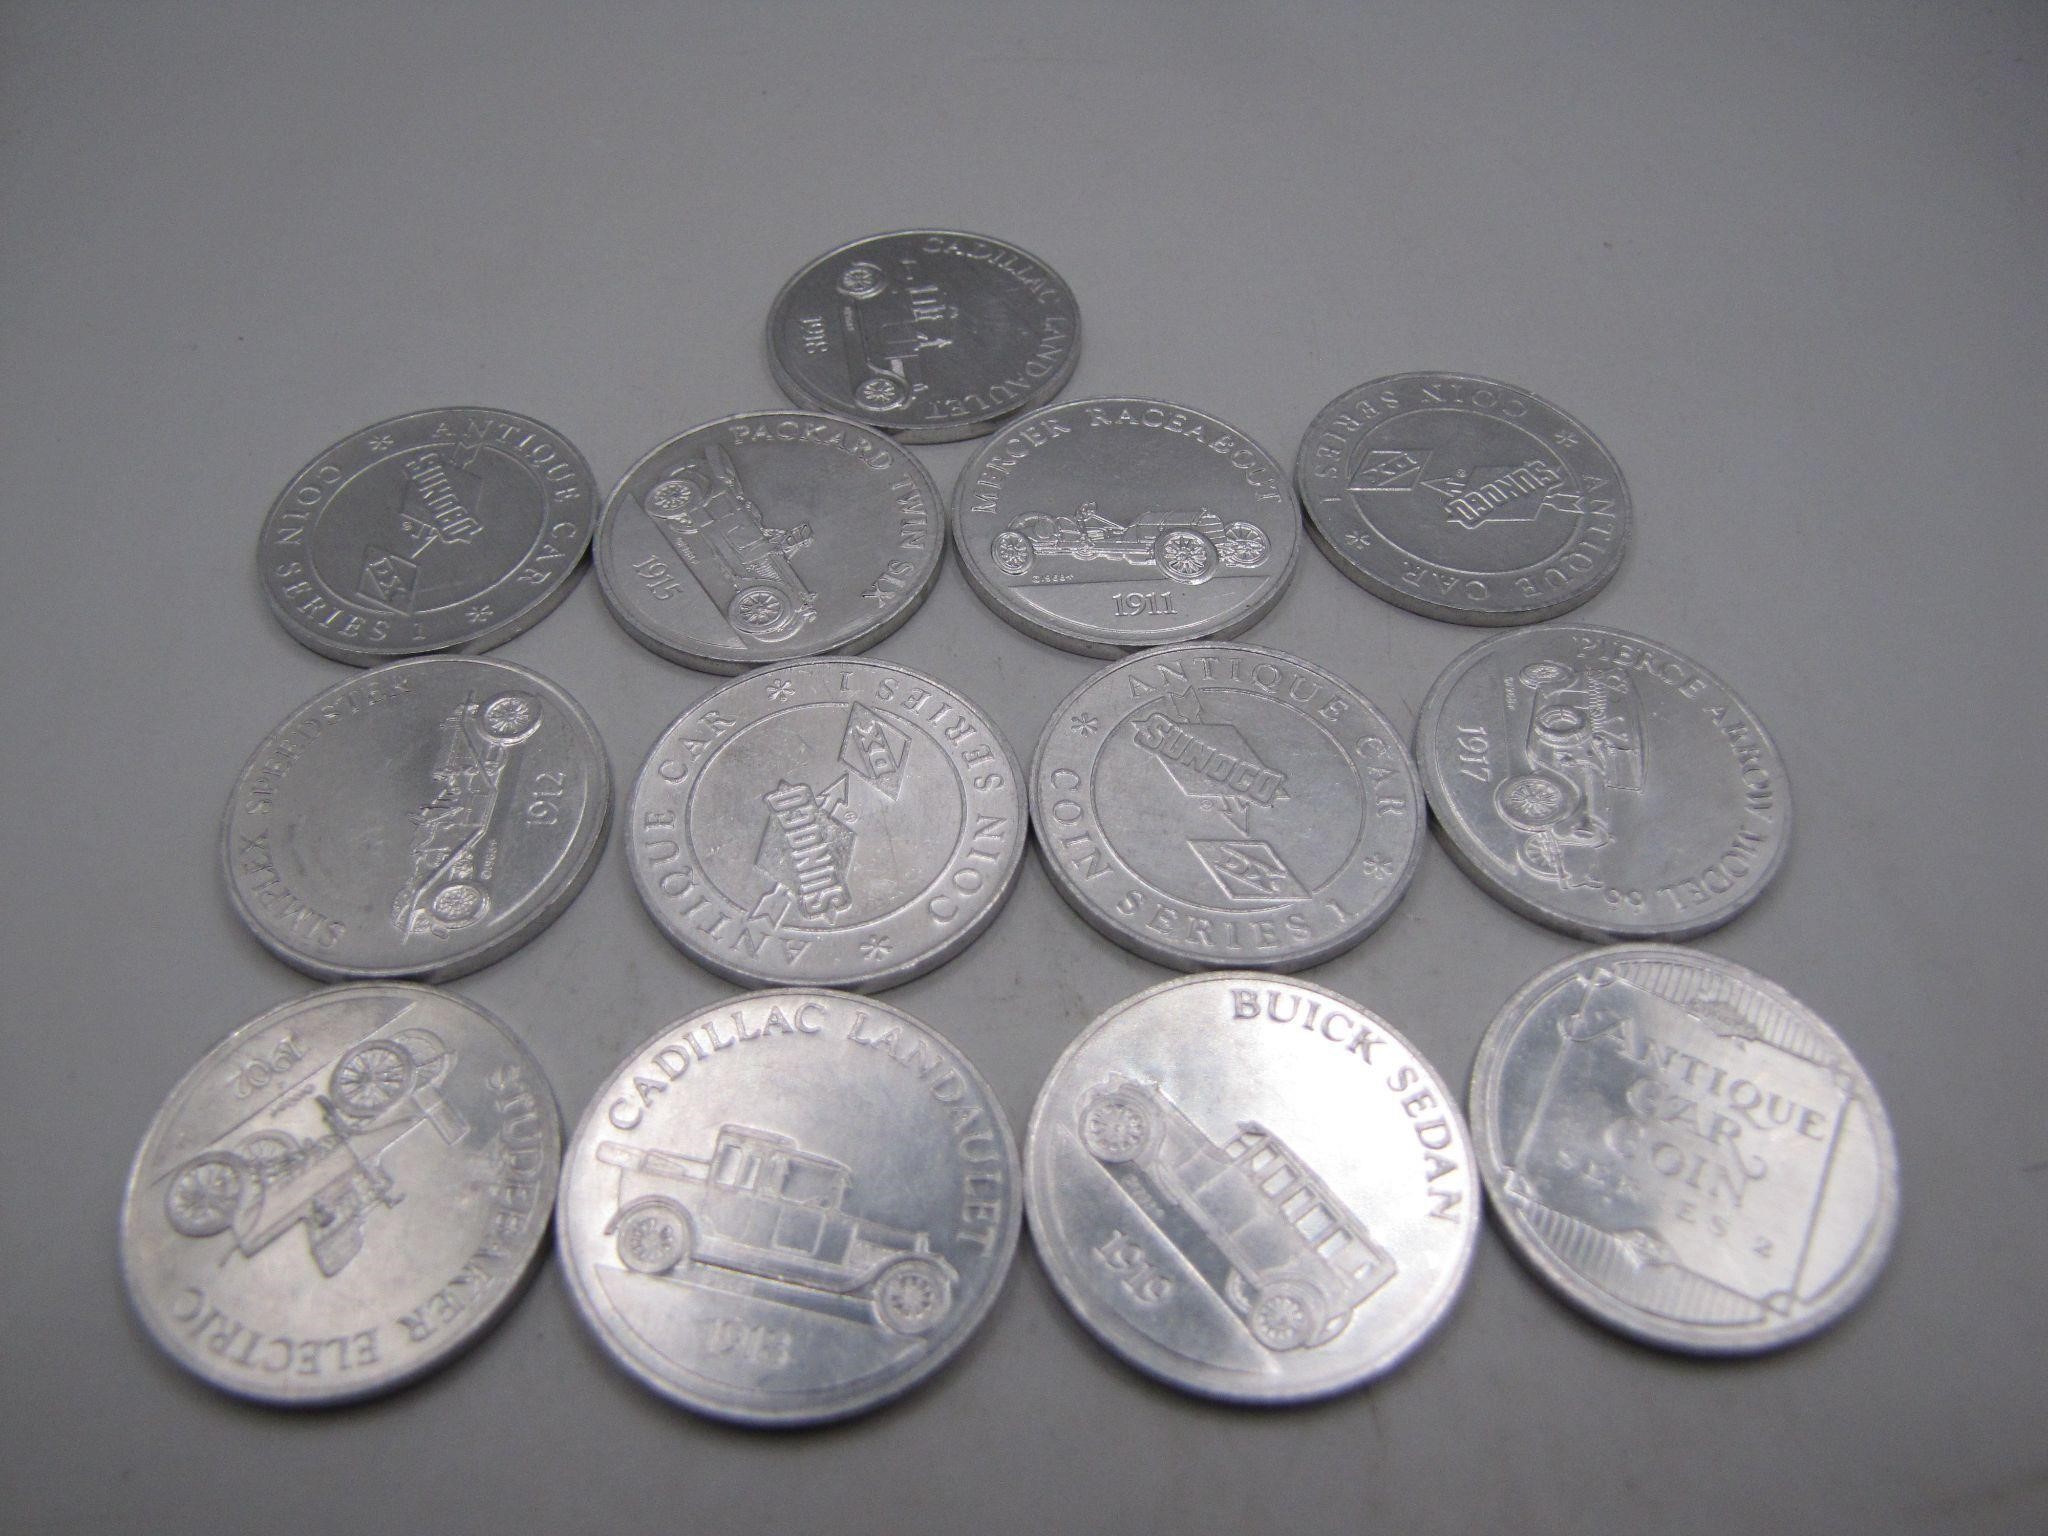 Lot of 13 Vintage Sunoco Car Tokens